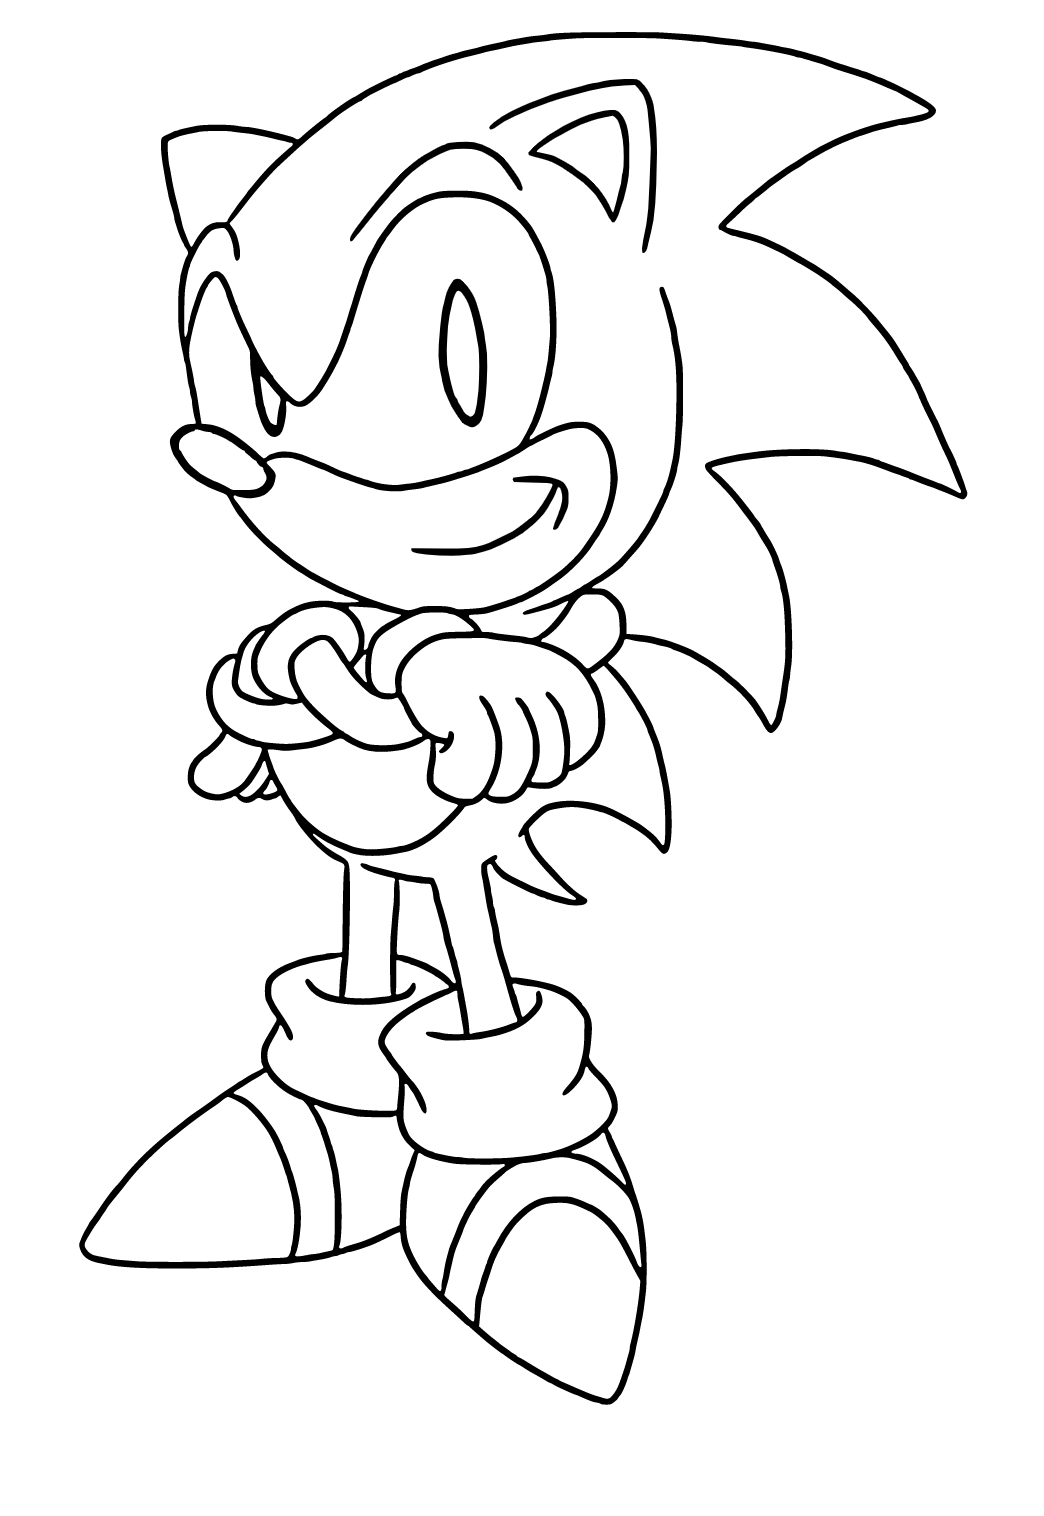 Free Printable Sonic Prime Coloring Page, Sheet and Picture for Adults and  Kids (Girls and Boys) 